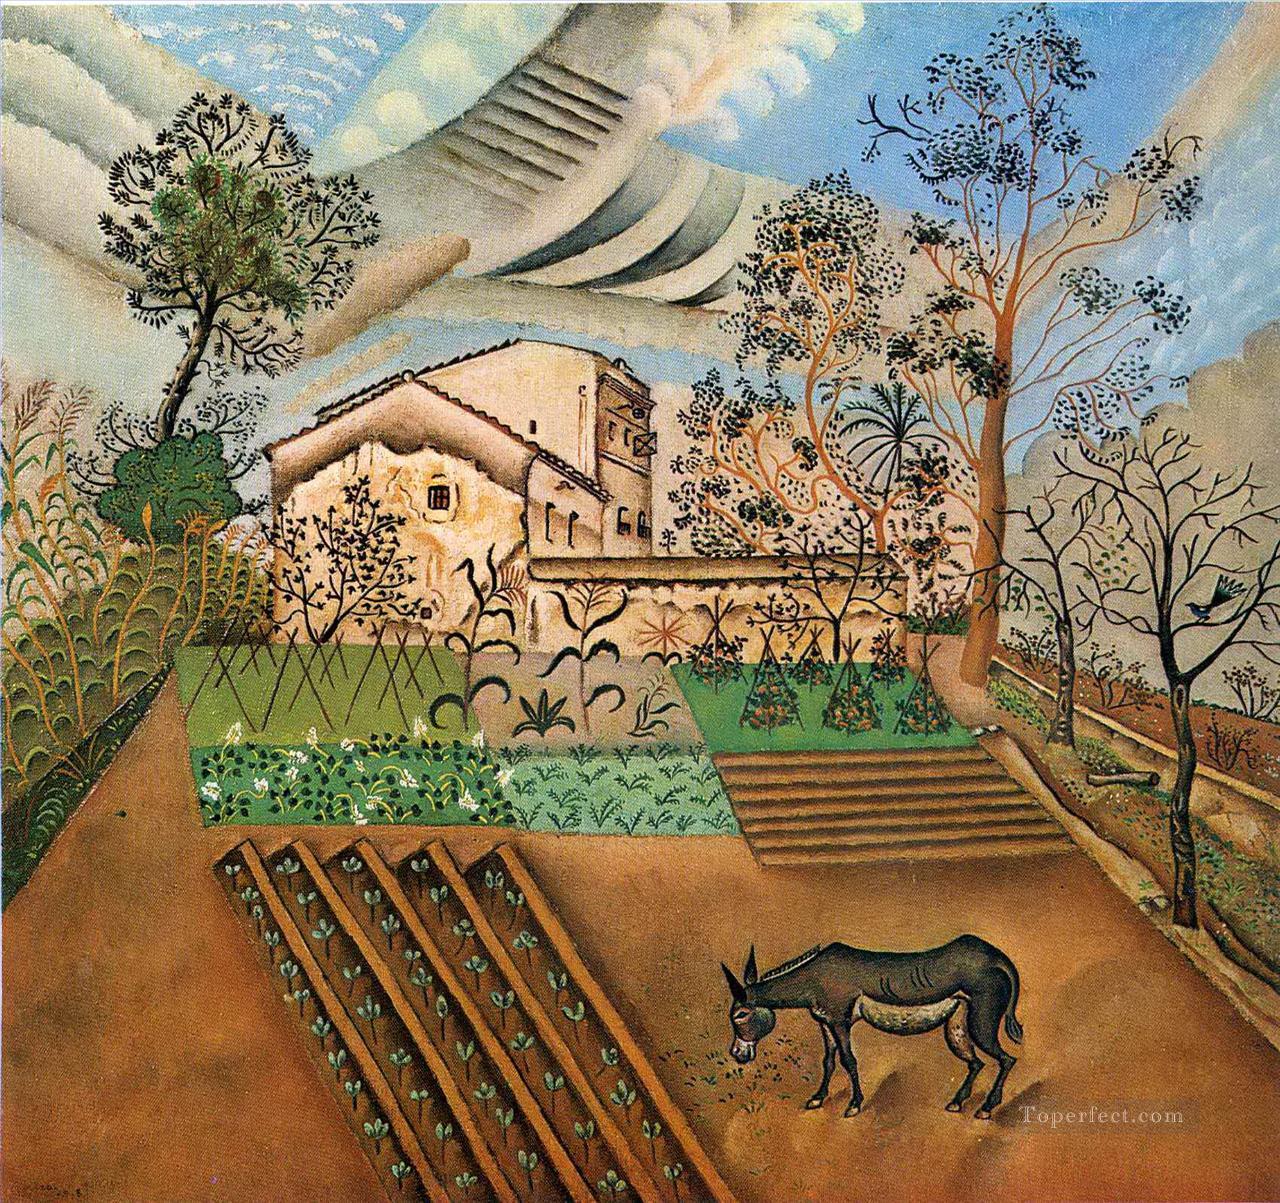 The Vegetable Garden with Donkey Dadaism Oil Paintings